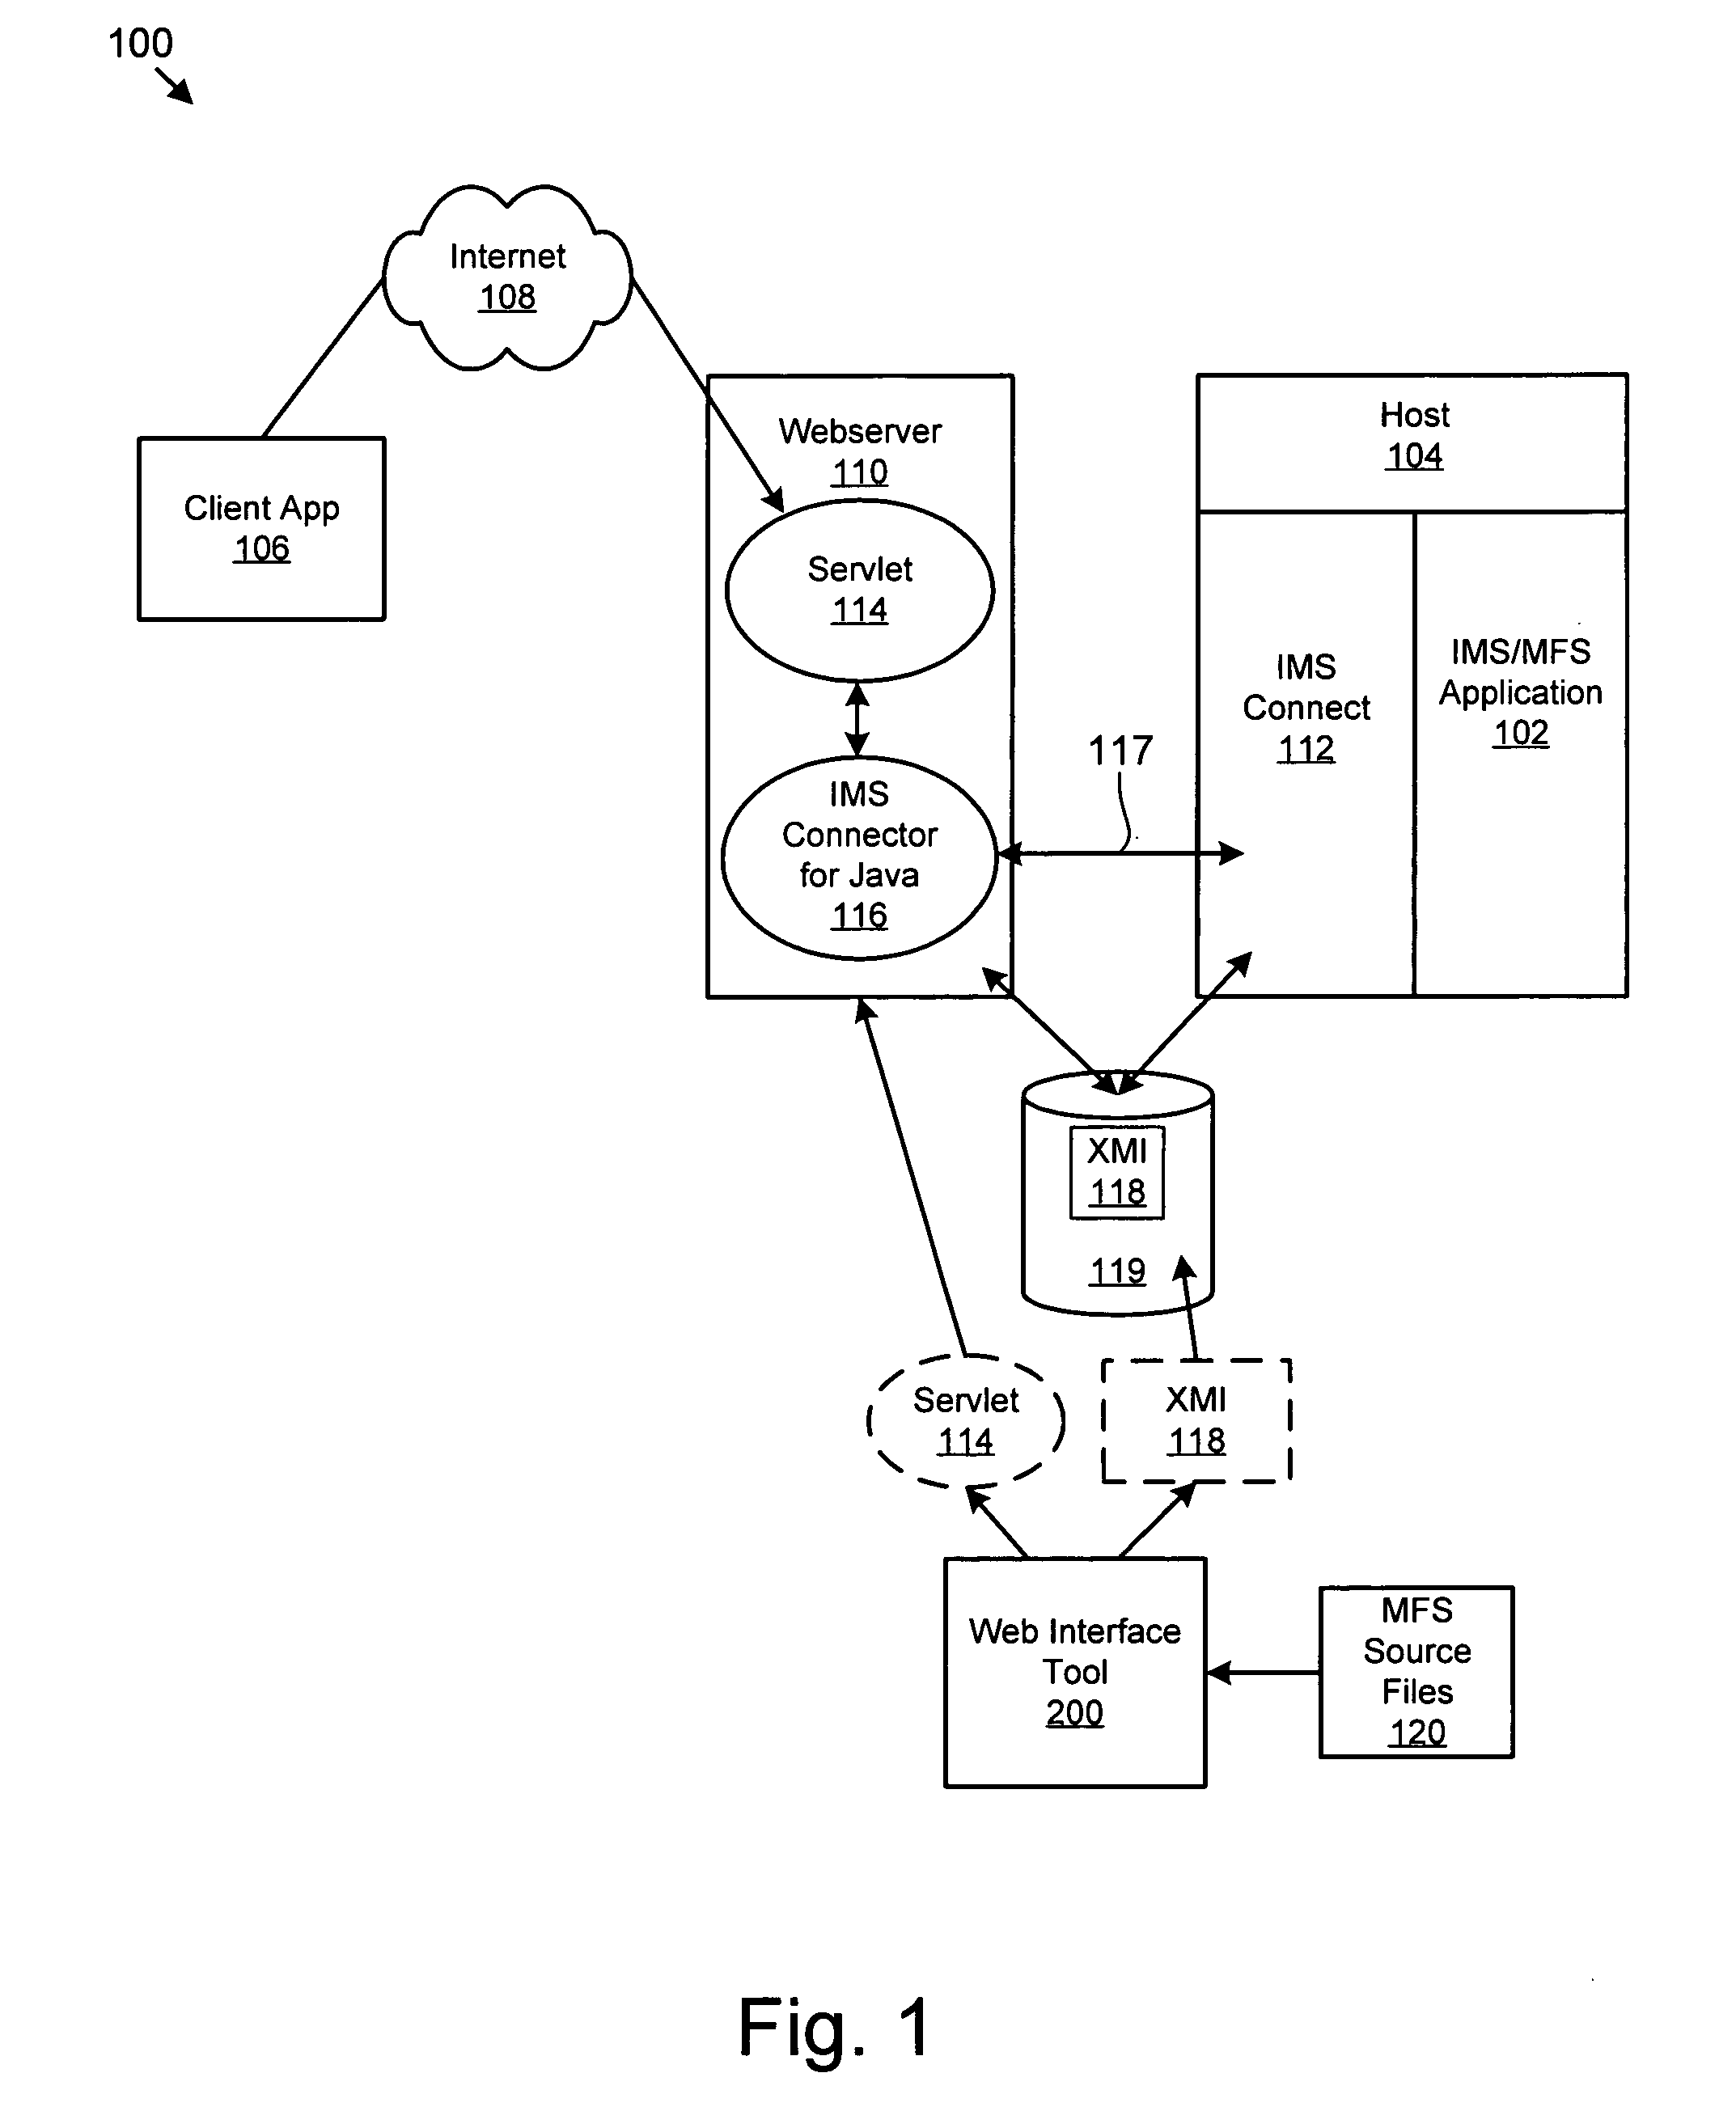 Apparatus, system, and method for automatically generating a web interface for an MFS-based IMS application